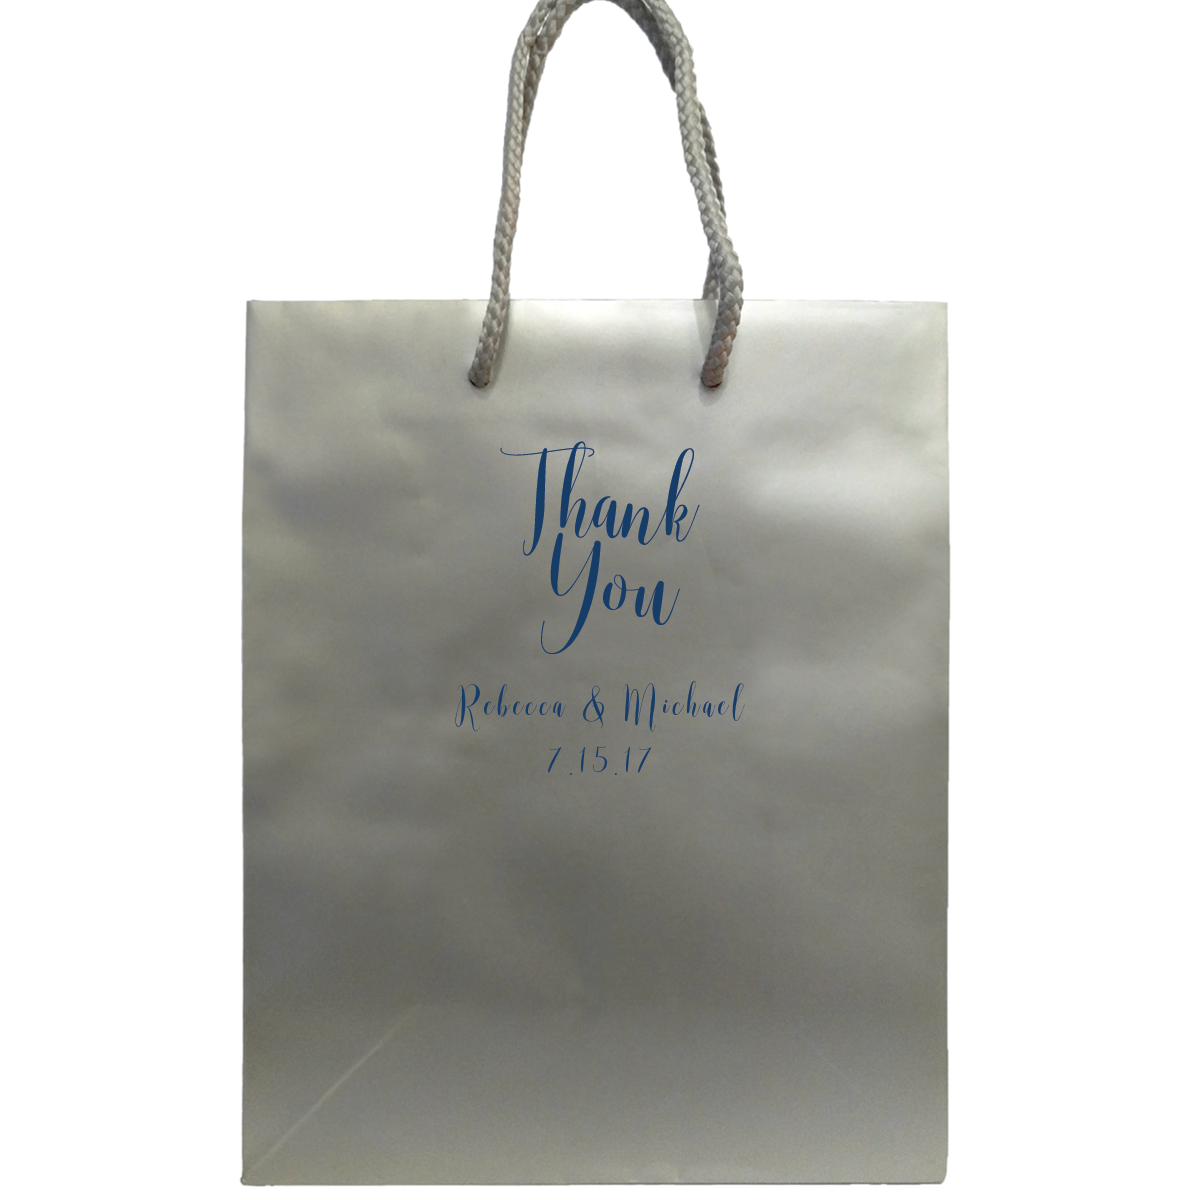 Just Married Wedding Welcome Bags - Personalized Gift Bag - Audrey